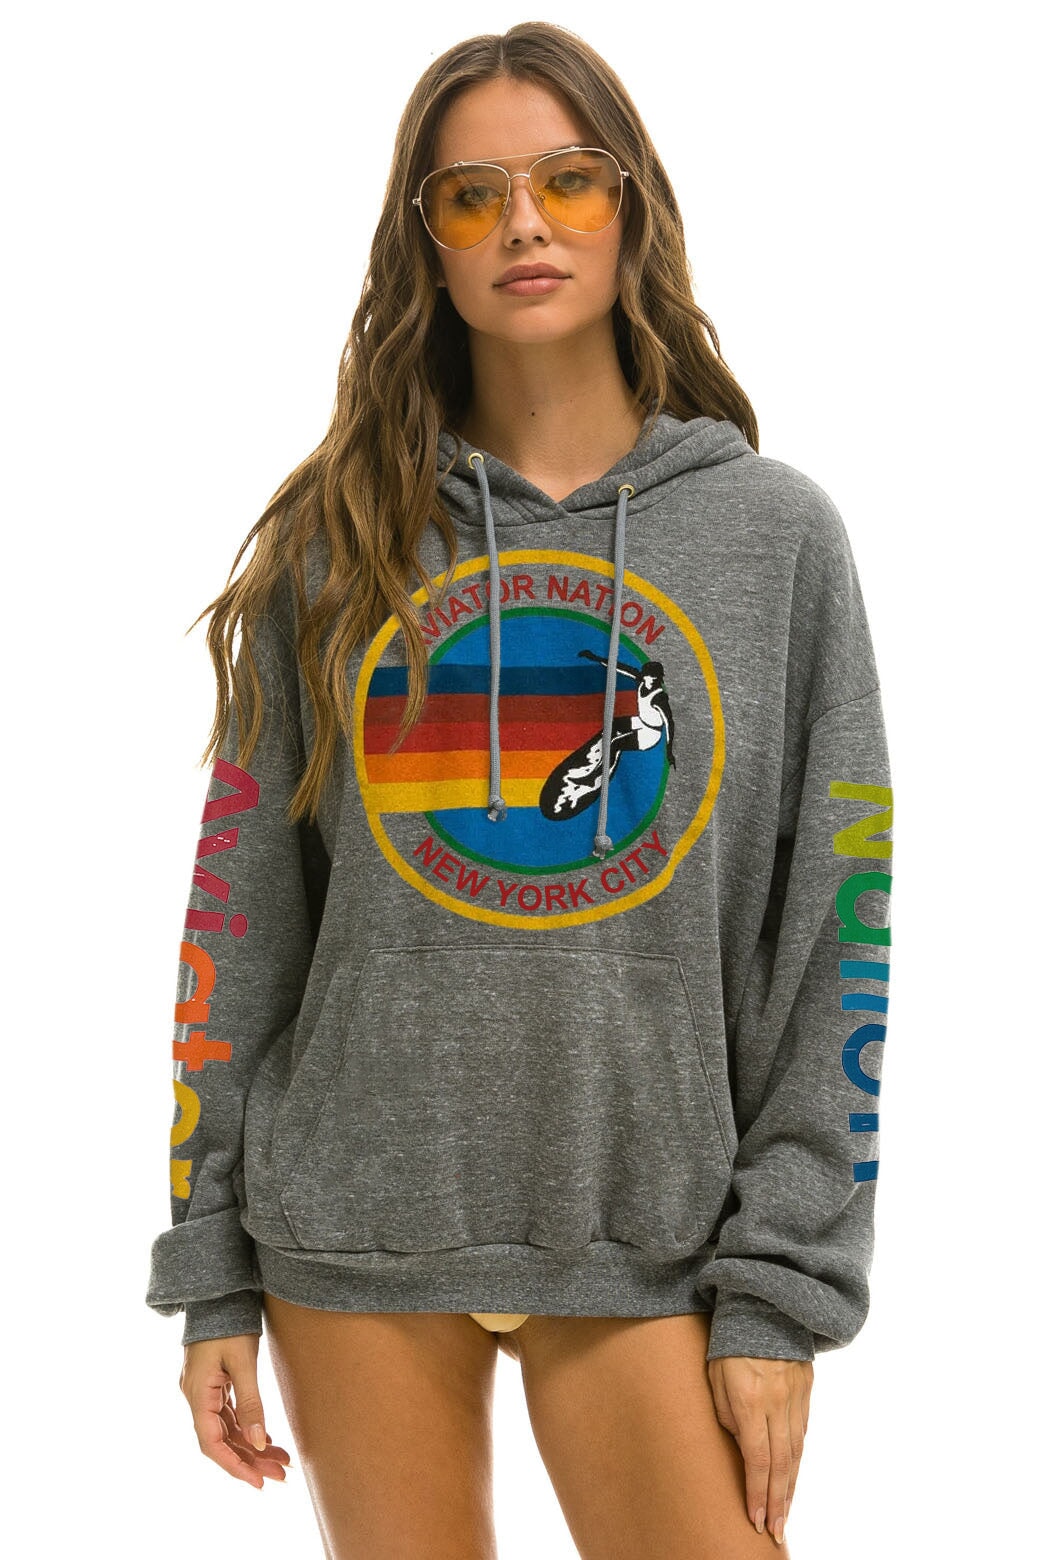 AVIATOR NATION NEW YORK CITY RELAXED PULLOVER HOODIE - HEATHER GREY Hoodie Aviator Nation 